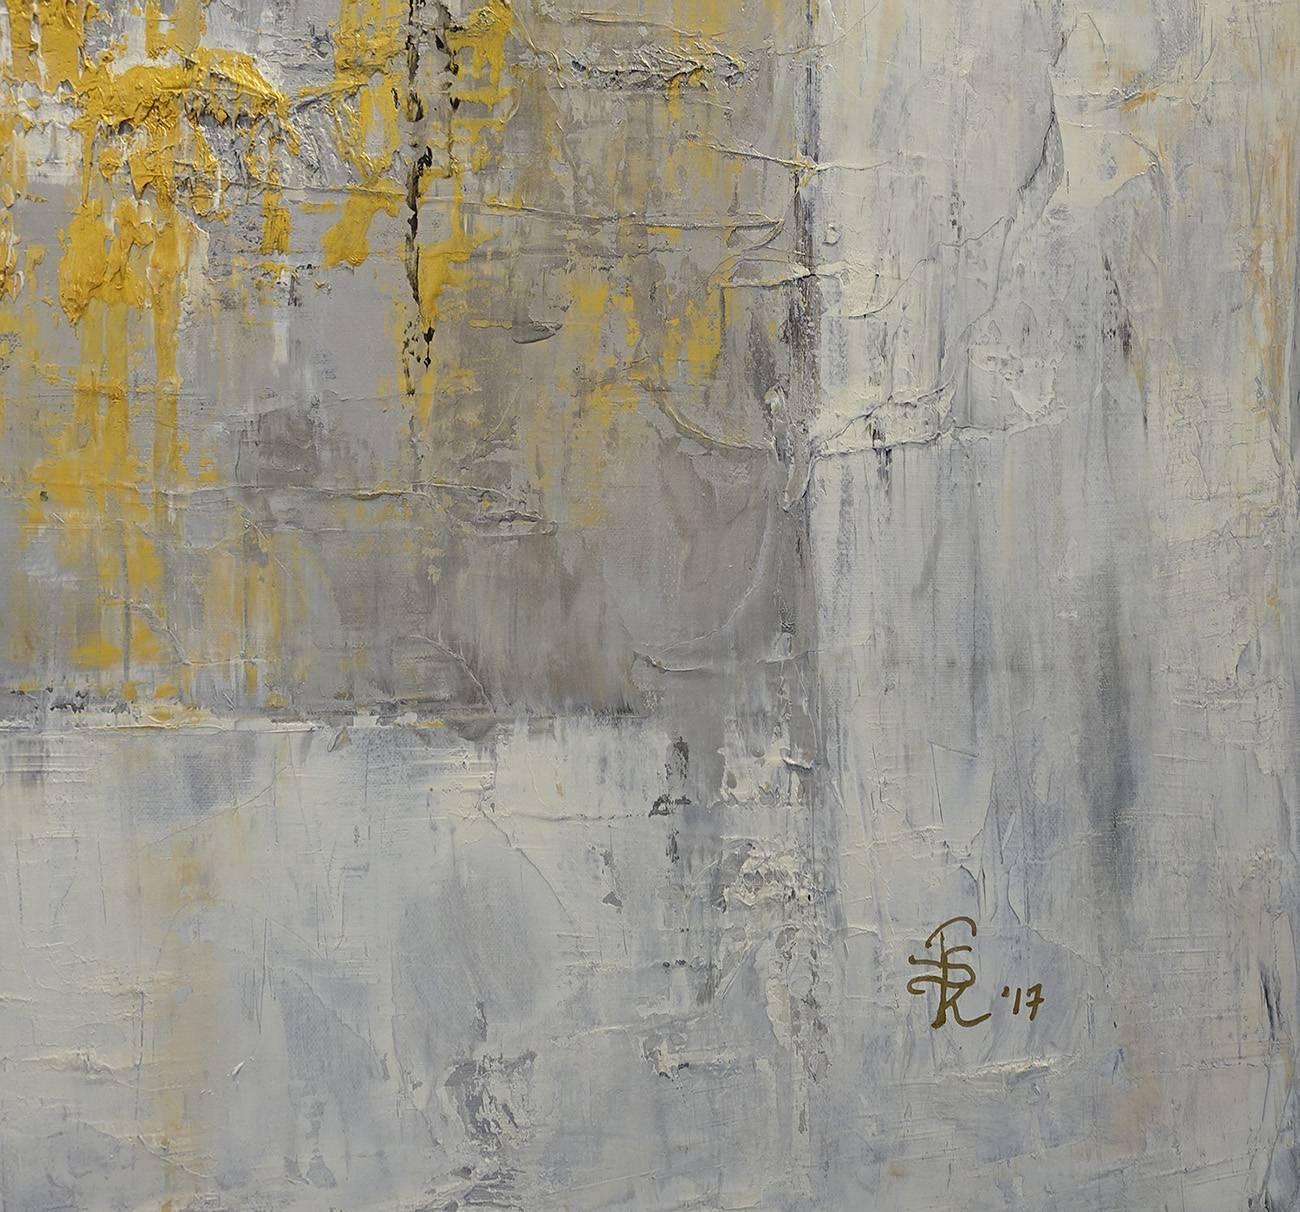 Ice Cube 4 (Gold, Yellow, White, Gray, Silver, Abstract Expressionist Painting) For Sale 1